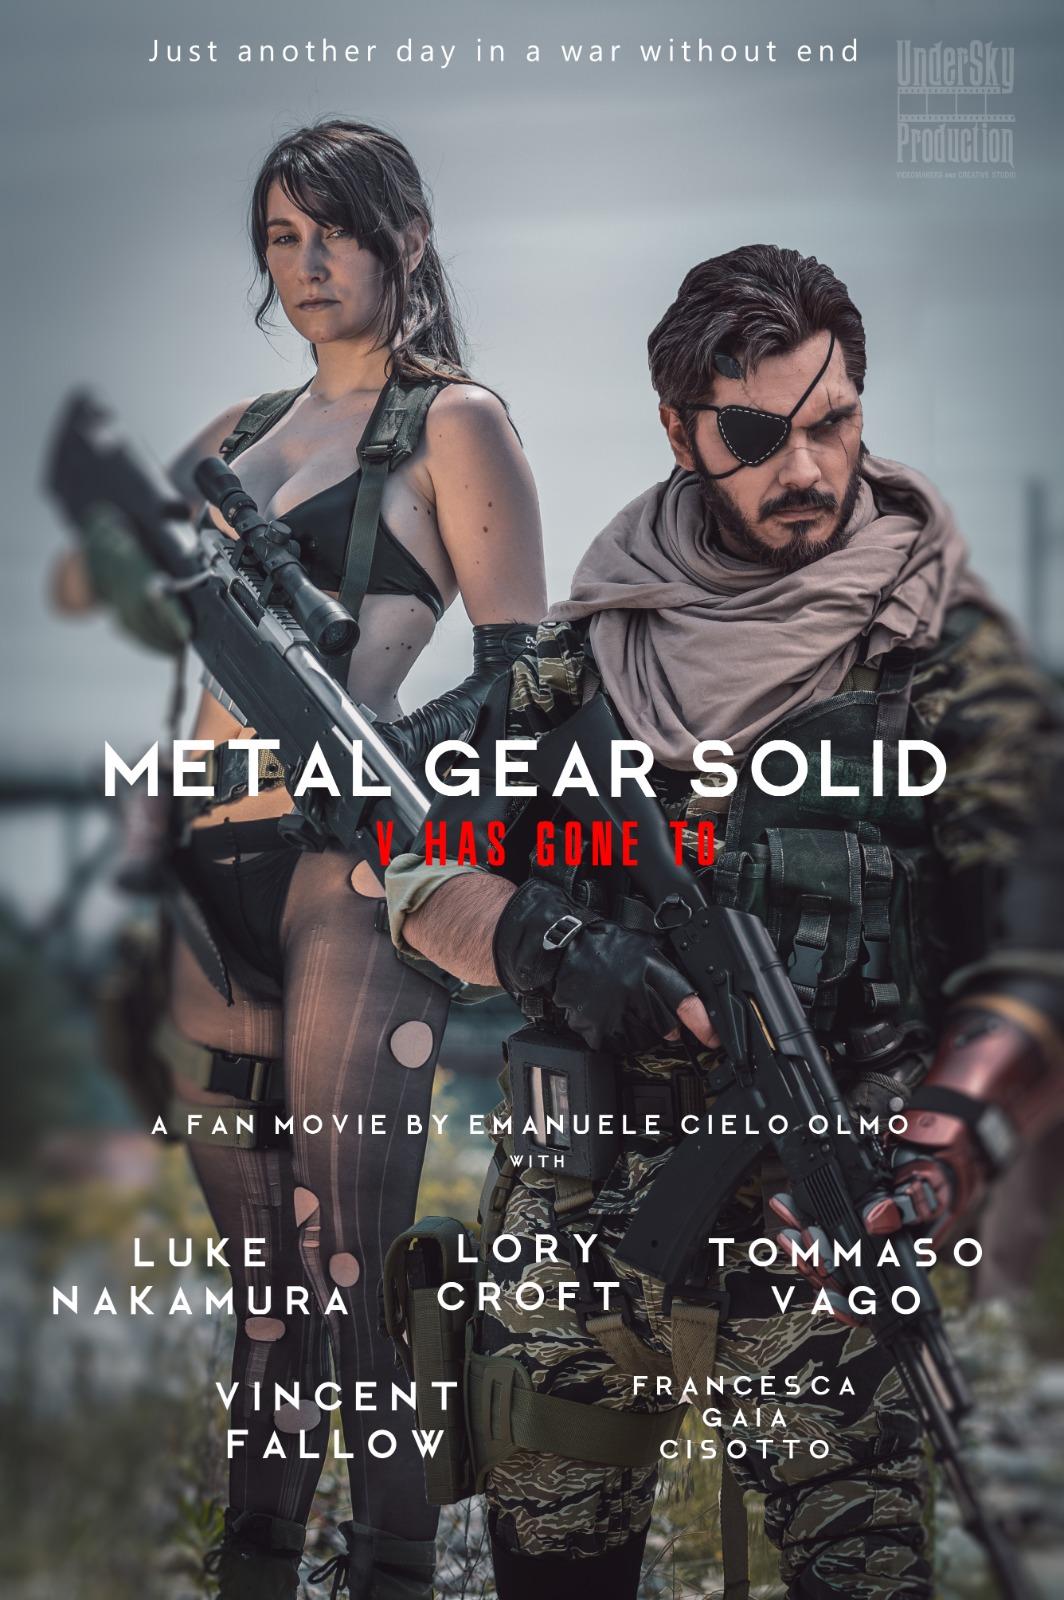 locandina di "Metal Gear Solid: V Has Gone To"